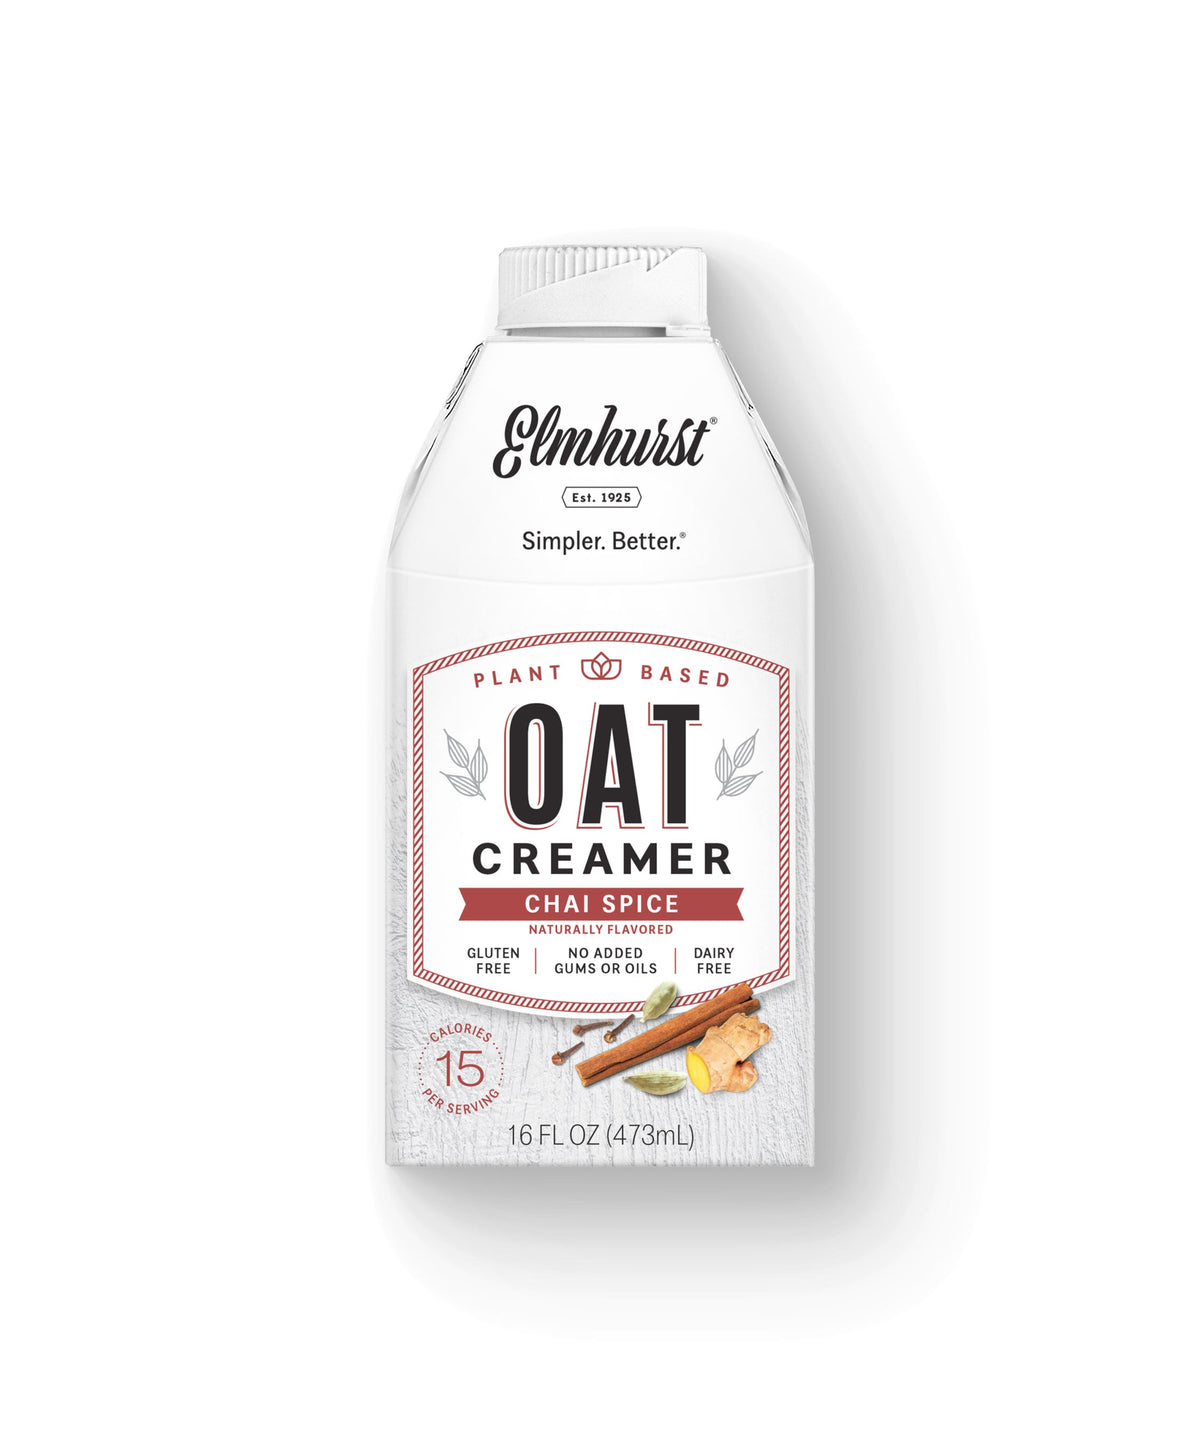 Oat Creamer - Chai exclusive at Tastermonial